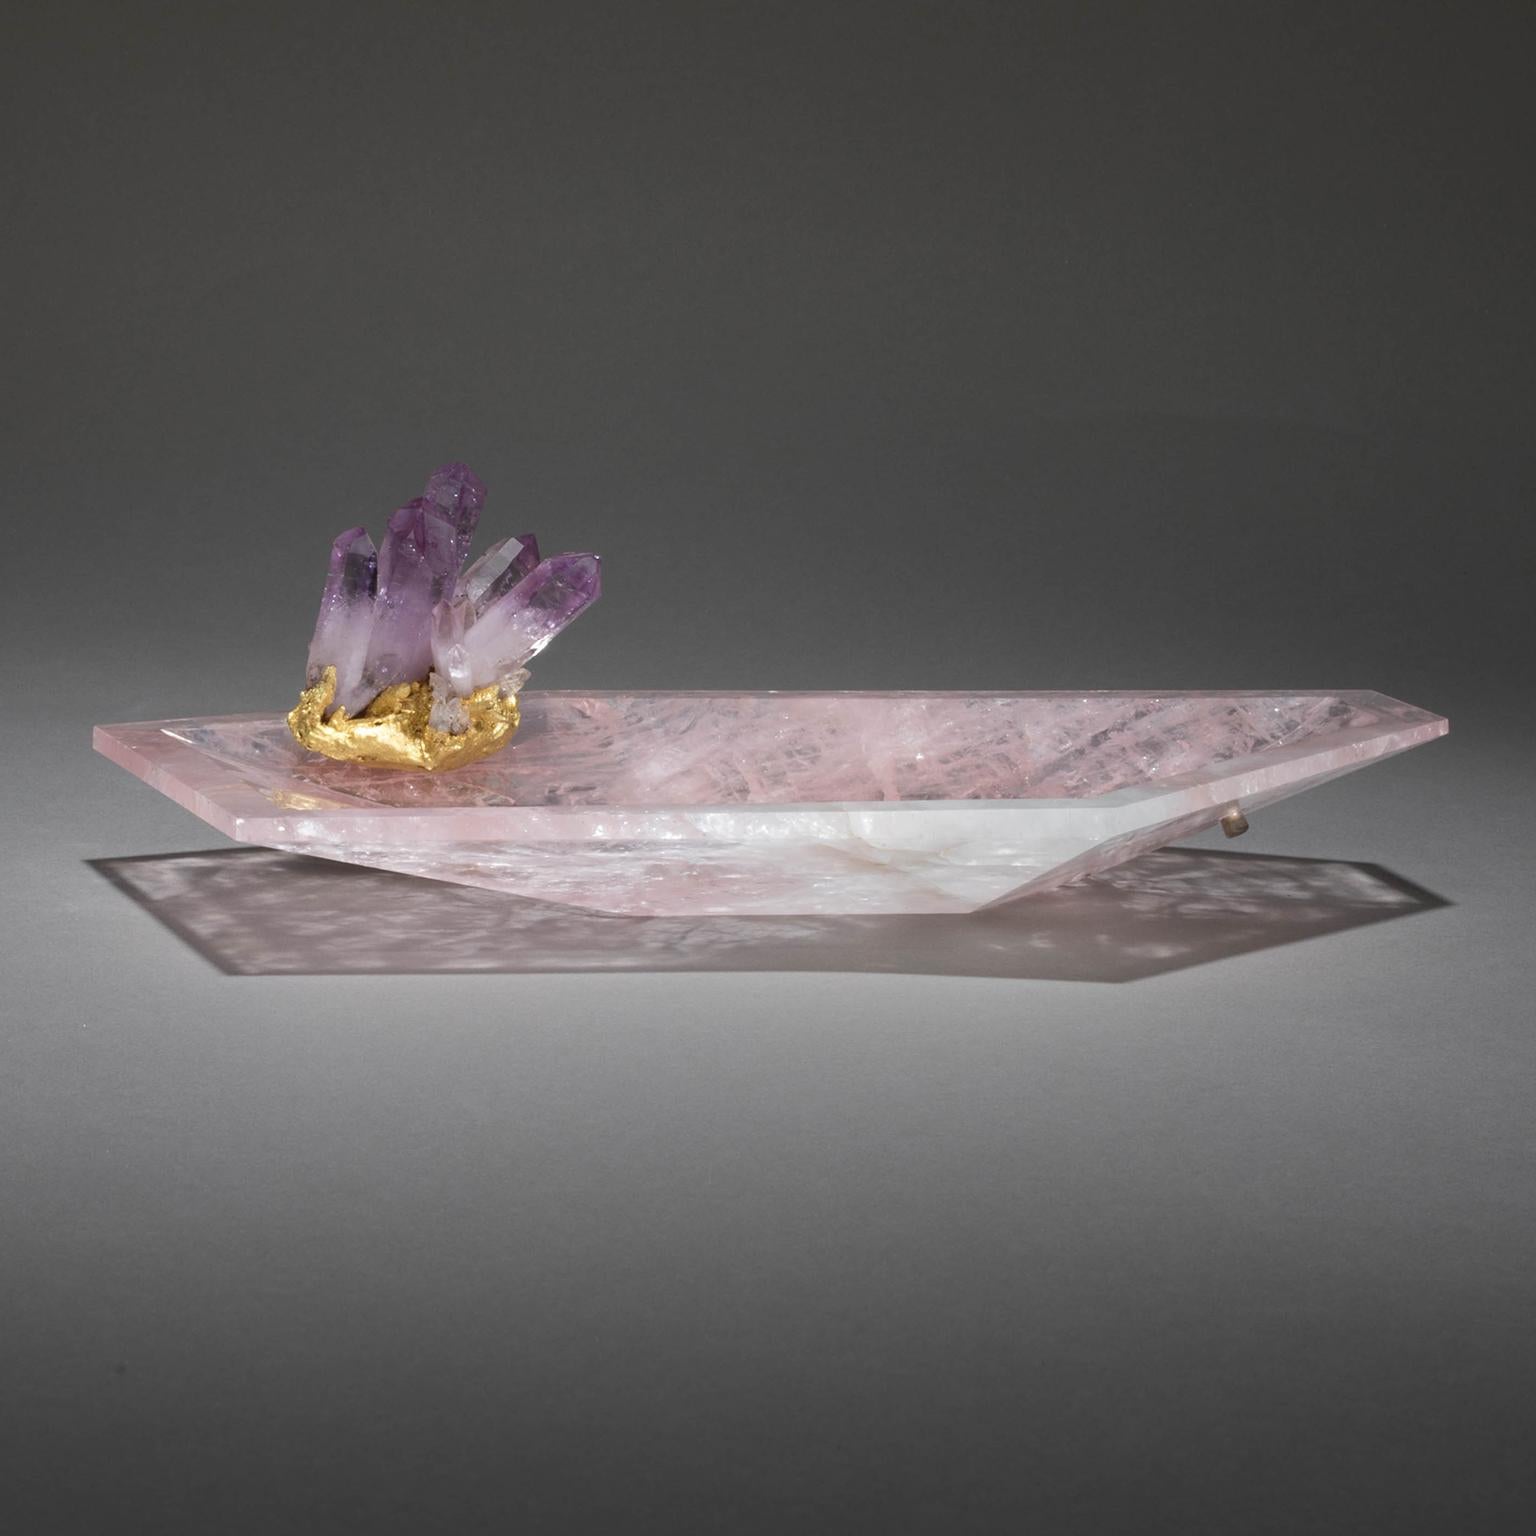 CRYSTAL BLING BOWL 4

Studio Greytak’s Crystal Bling Bowl 4 stretches slowly skyward, pulled toward a mysterious power. A prism of amethyst, the mineral world’s most spiritually charged master, sits, butterfly-like, atop a single-cut rose quartz